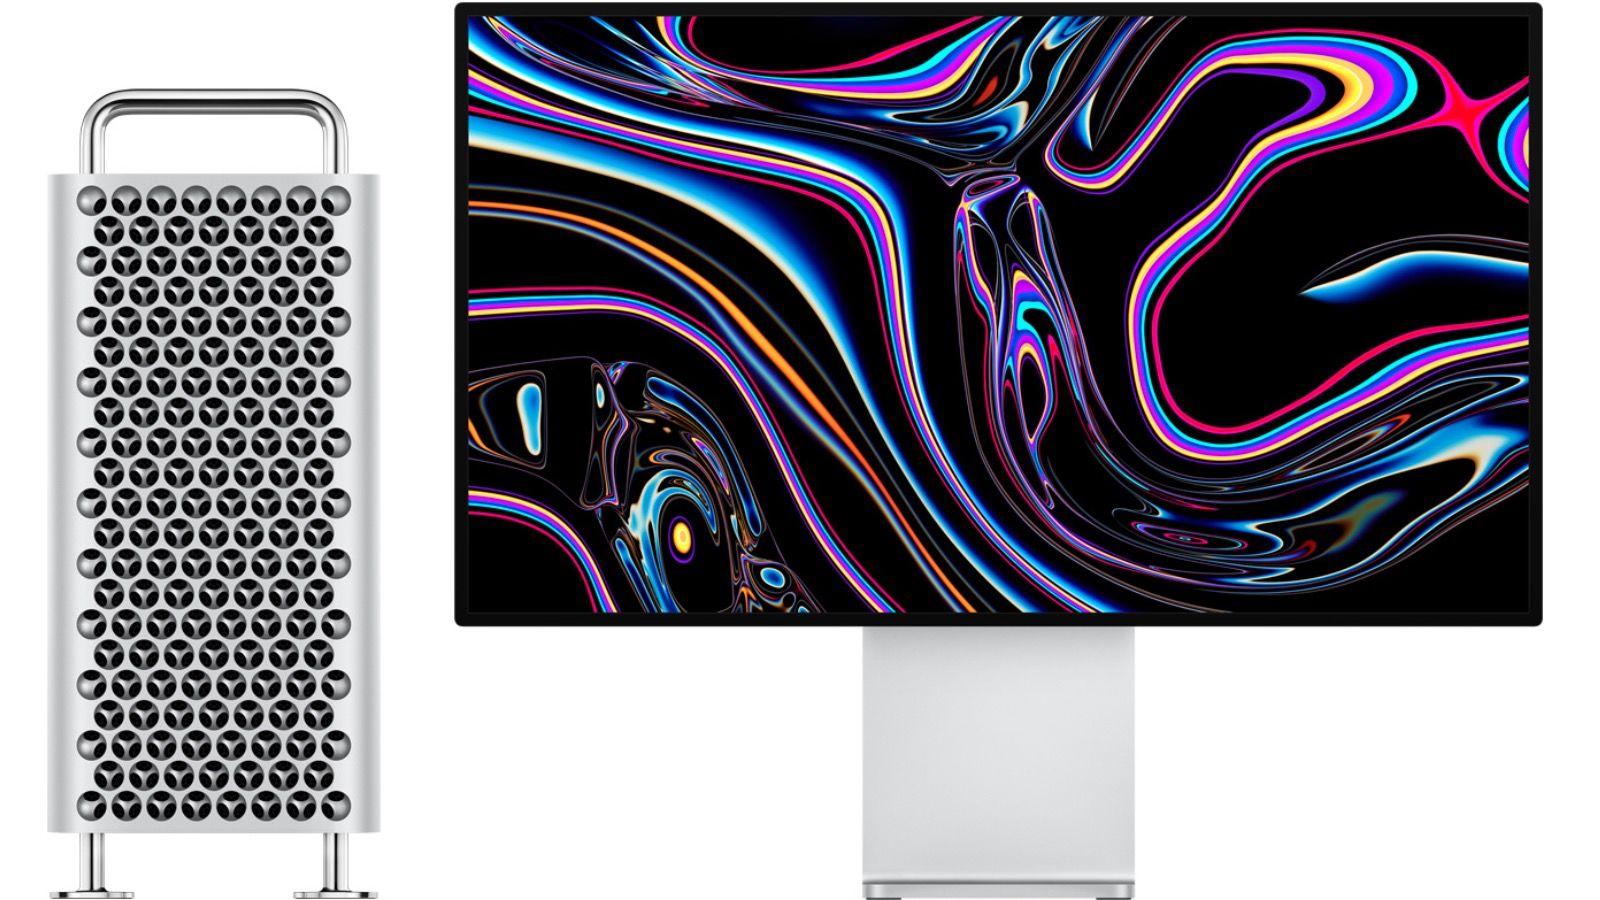 New iMac 2021 release date, price & specs for M1 iMac redesign